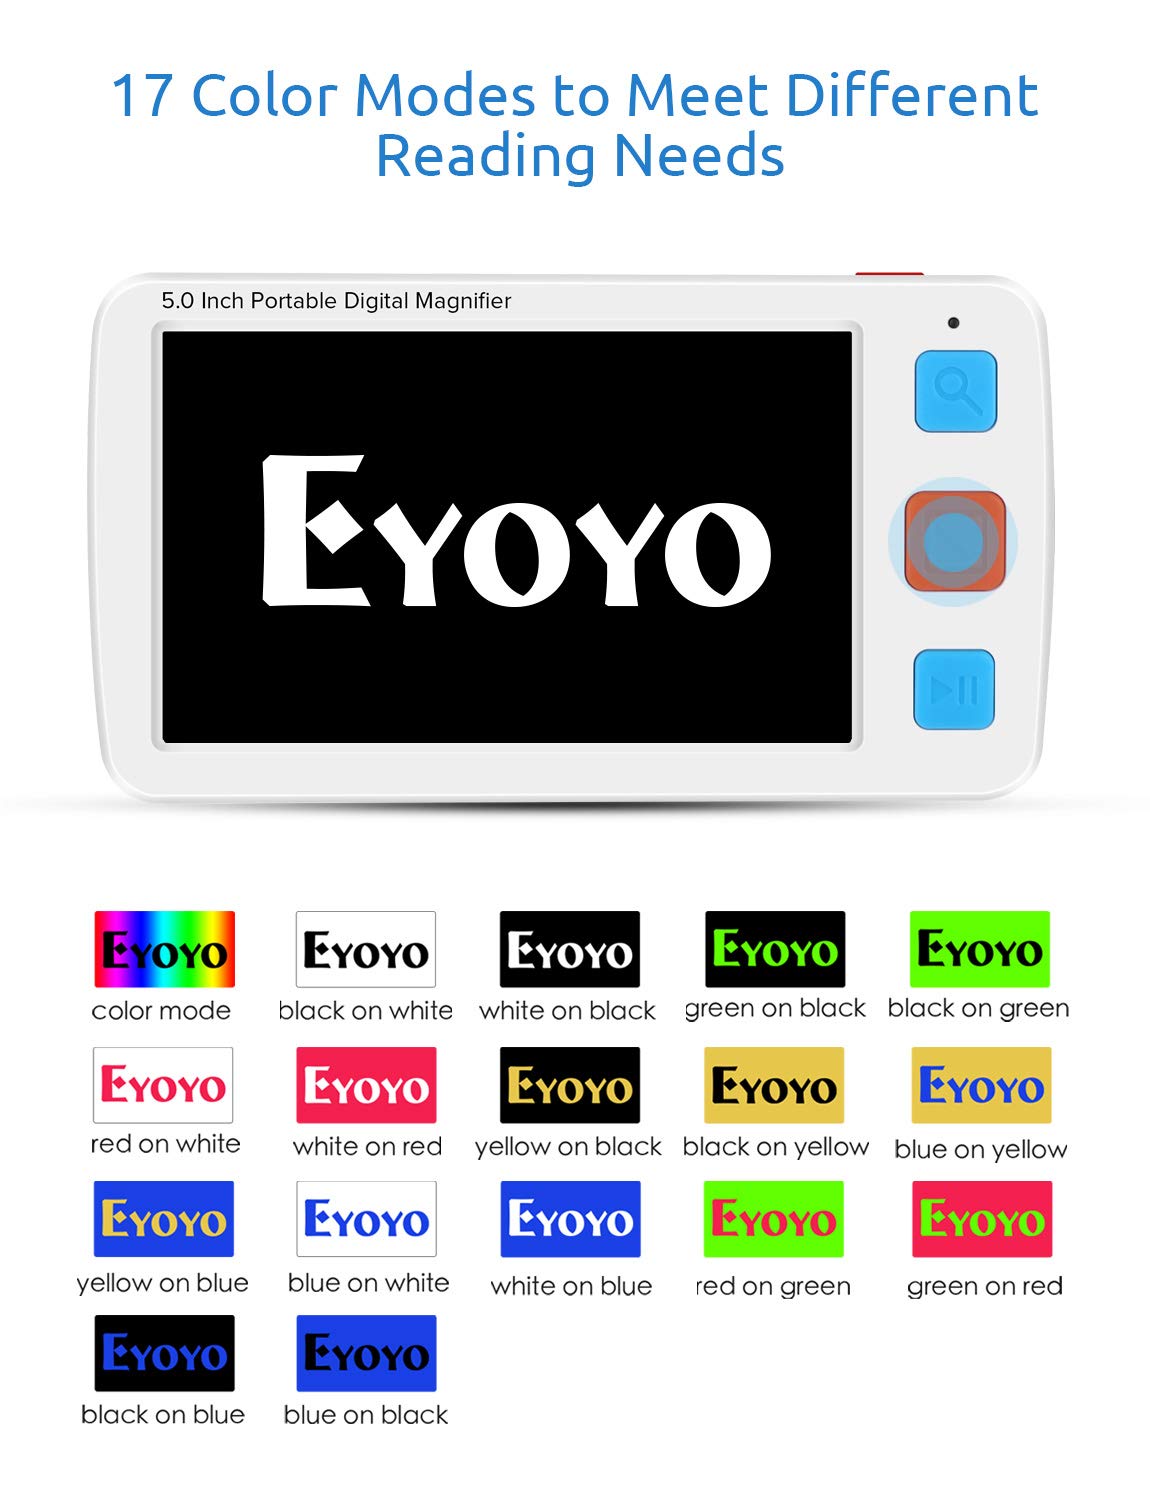 Eyoyo Portable Digital Magnifier Electronic Reading Aid 5.0 inch w/Foldable Handle for Low Vision Color Blindness 4X-32X Times Zoom 17 Color Modes 5 Levels for Brightness